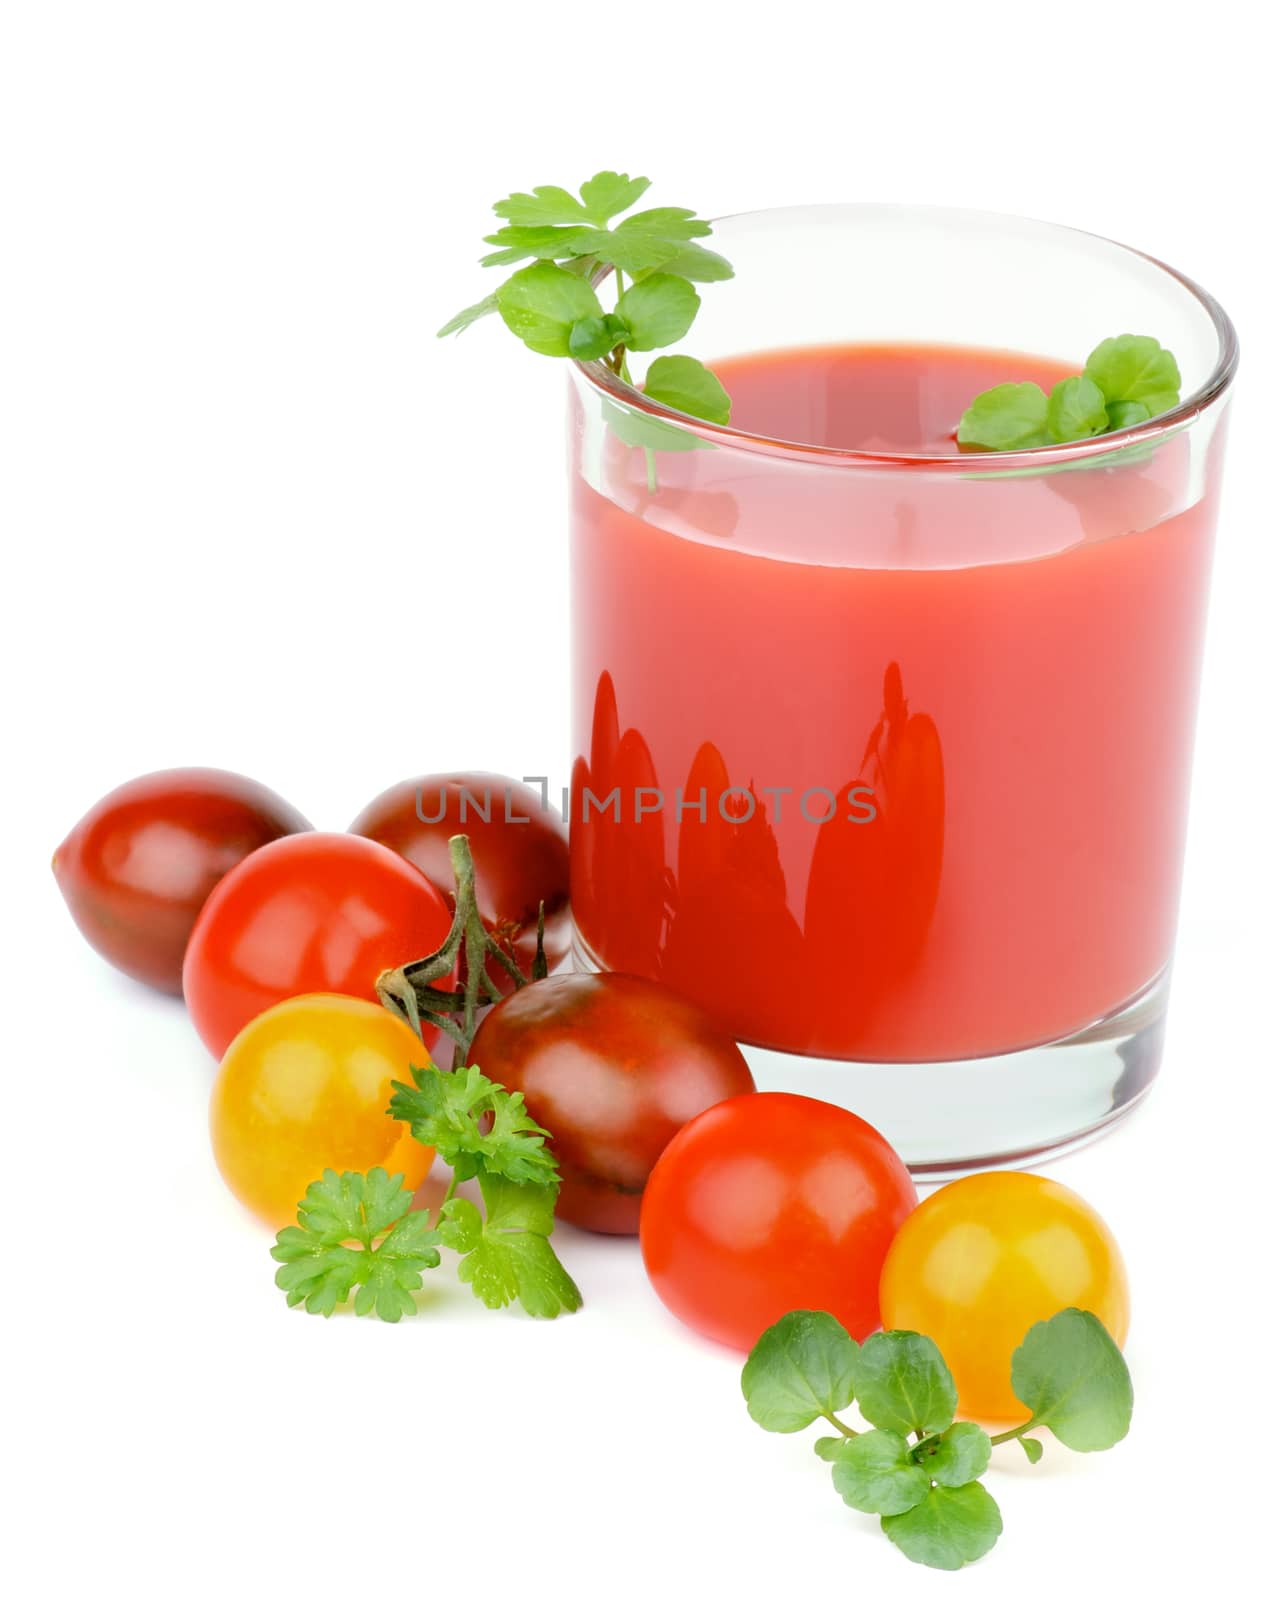 Glass of Tomato Juice and Heap of Brown, Yellow and Red Tomatoes with Parsley and Watercress closeup on White background